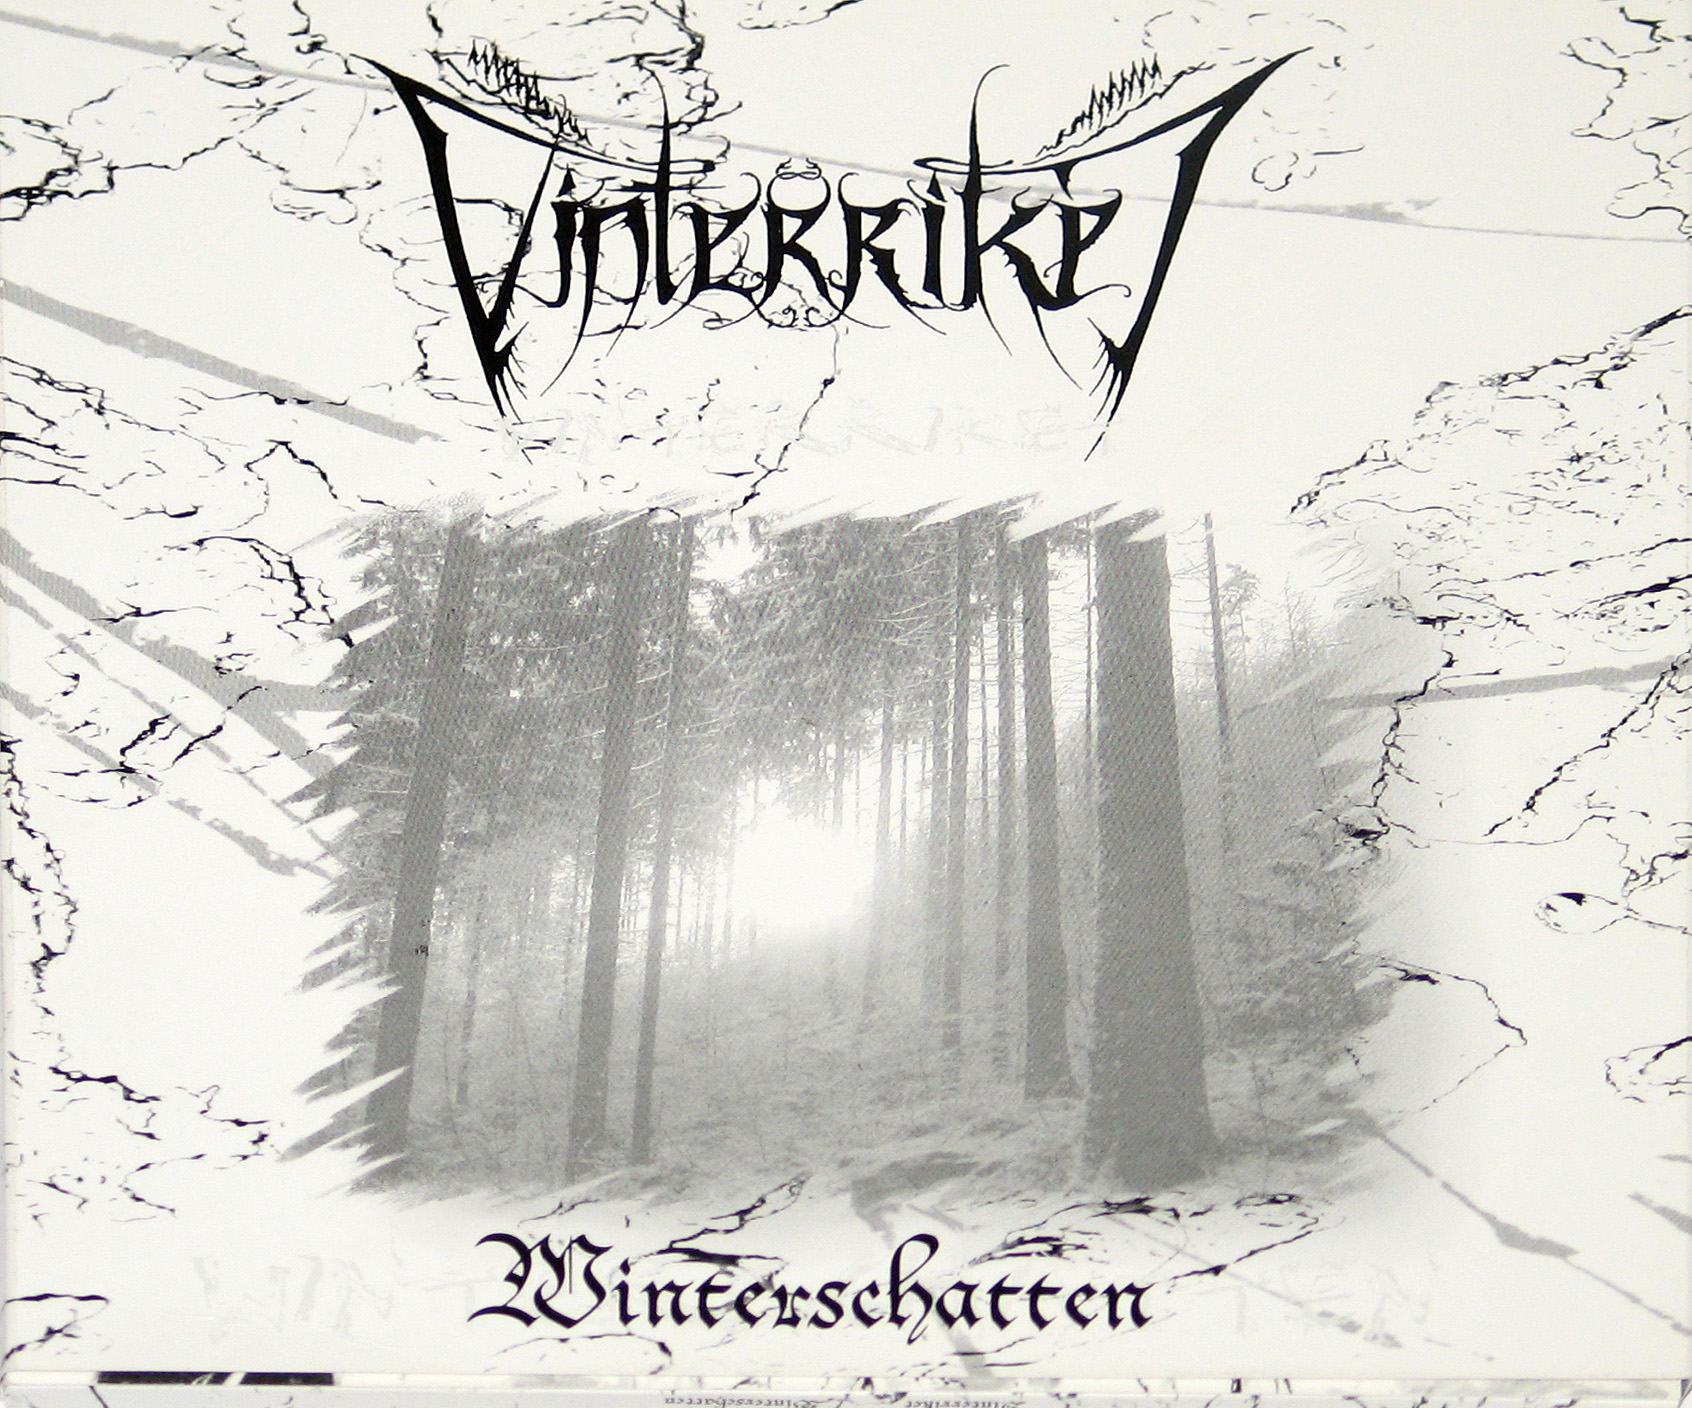 large photo of the album front cover of: Winterschatten 